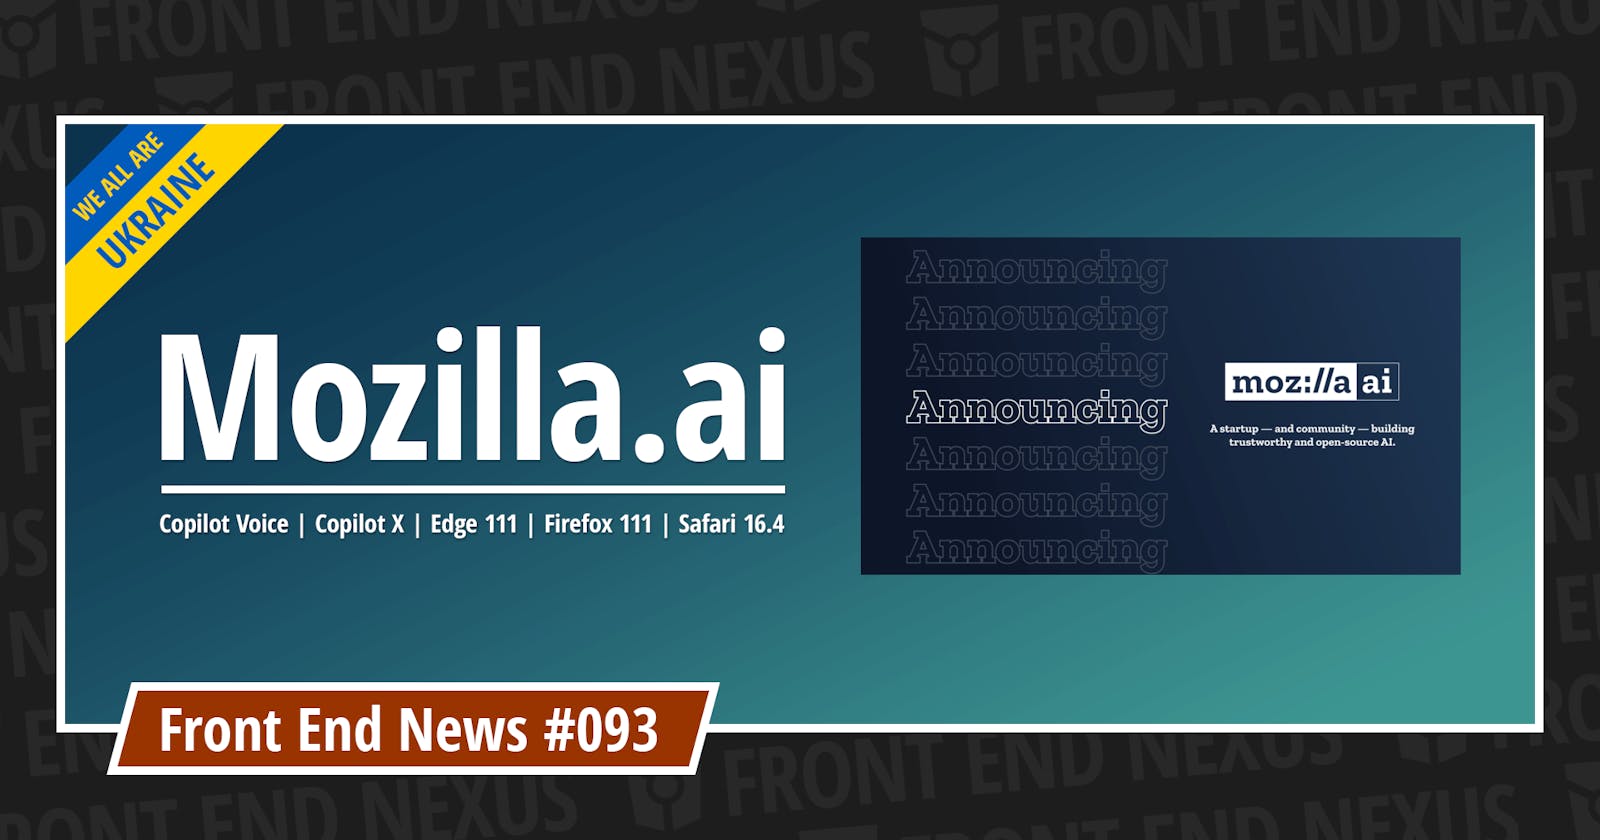 Introducing Mozilla.ai, GitHub Copilot Voice and Copilot X, Edge 111, Firefox 111, Safari 16.4, and more | Front End News #093